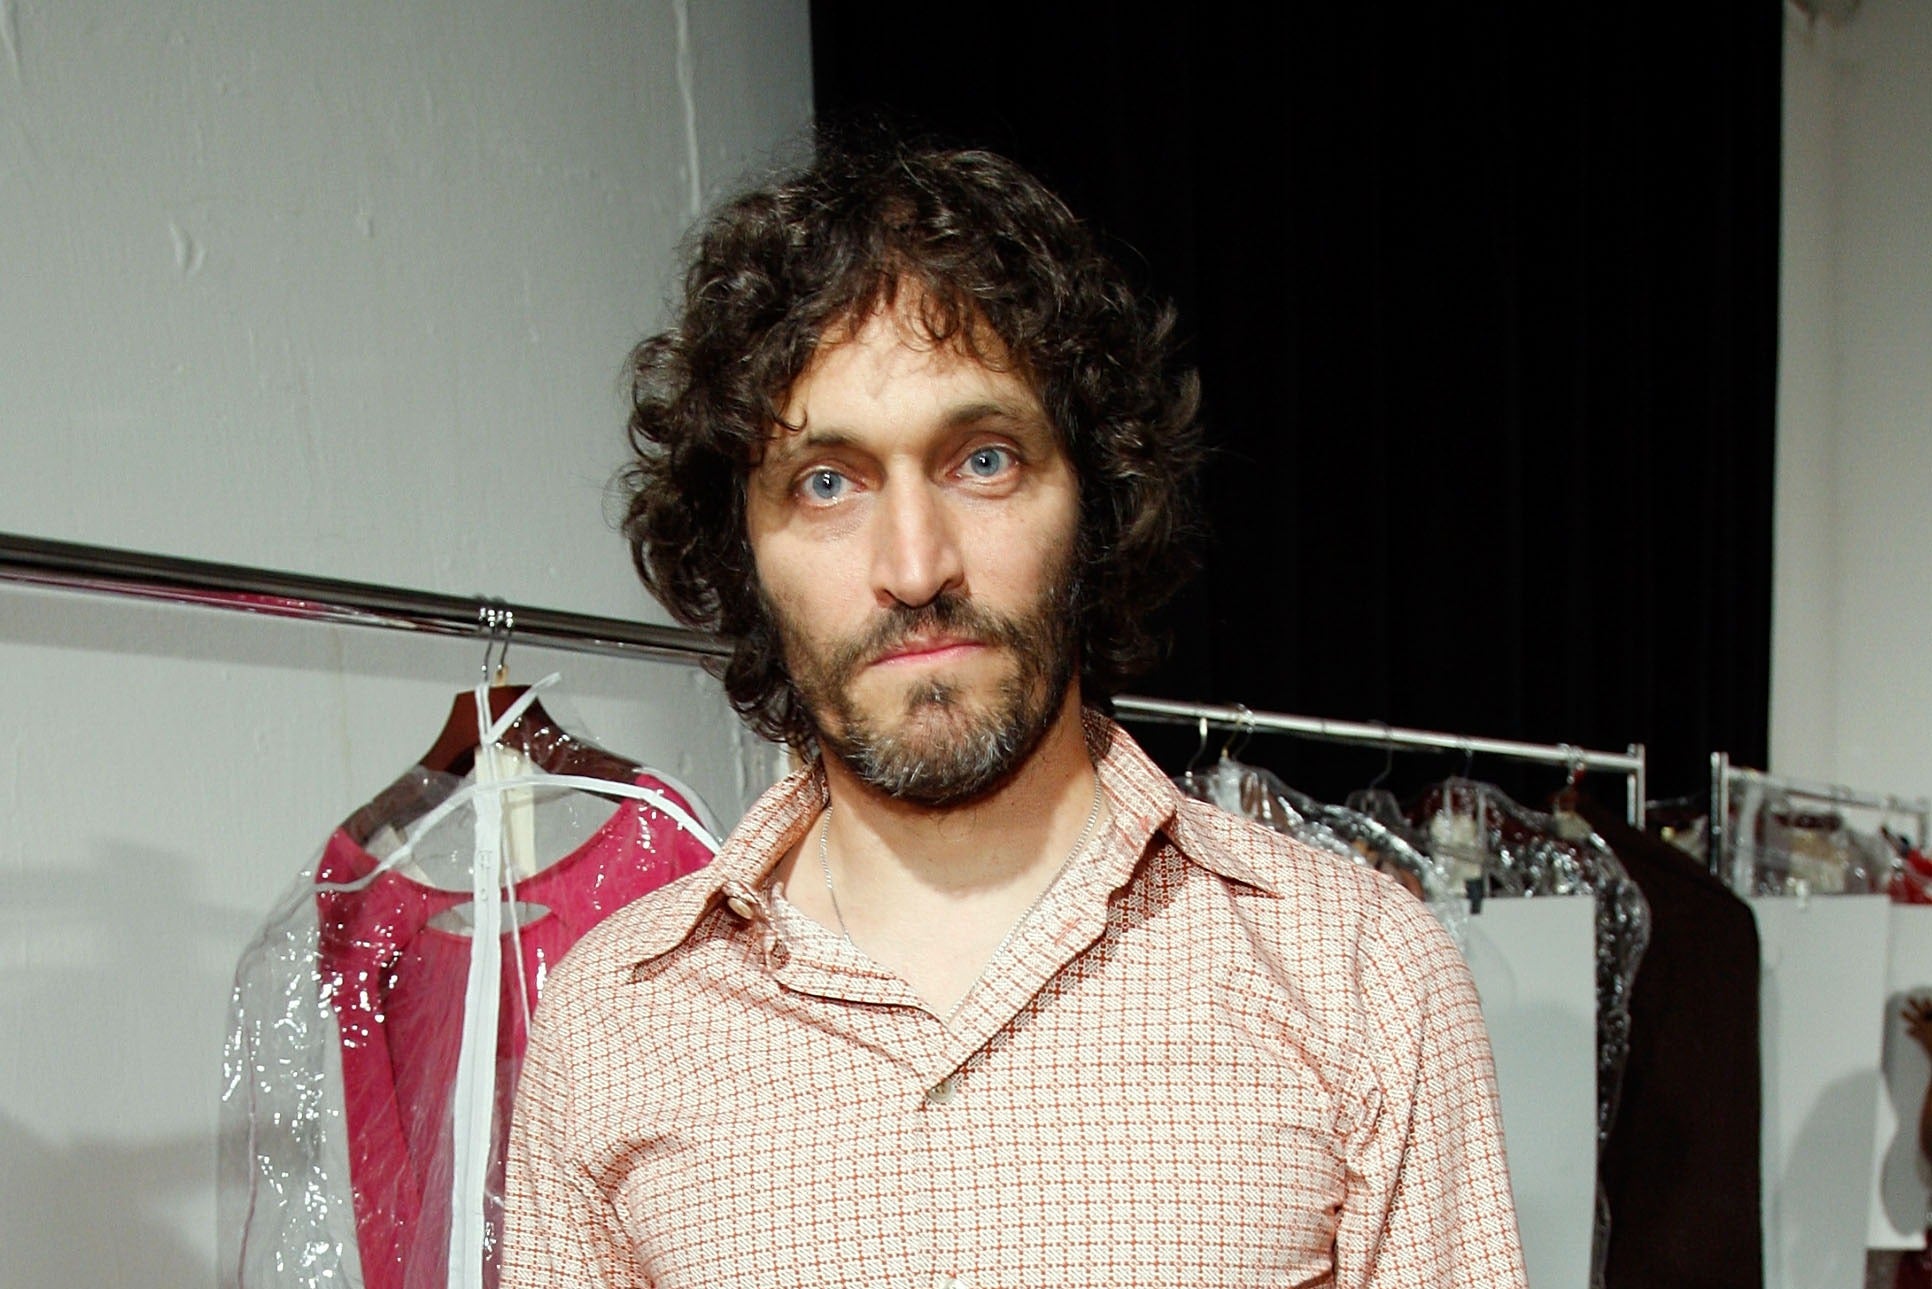 Vincent Gallo pictured in Culver City in 2007